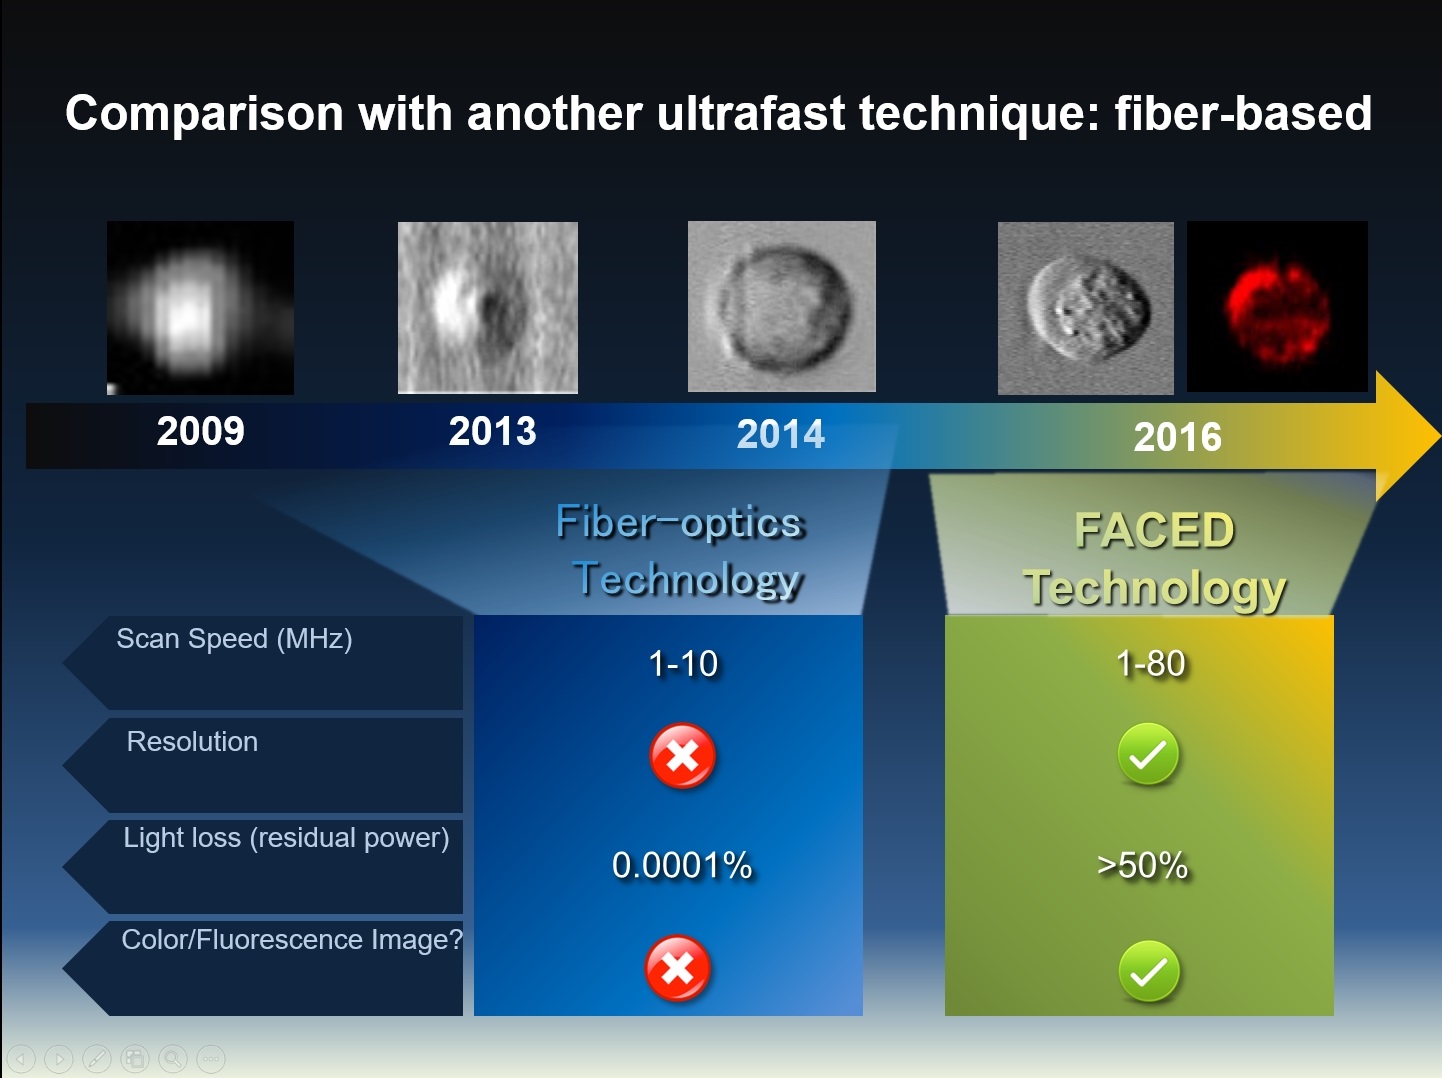 FACED compared with optical fibre based technology